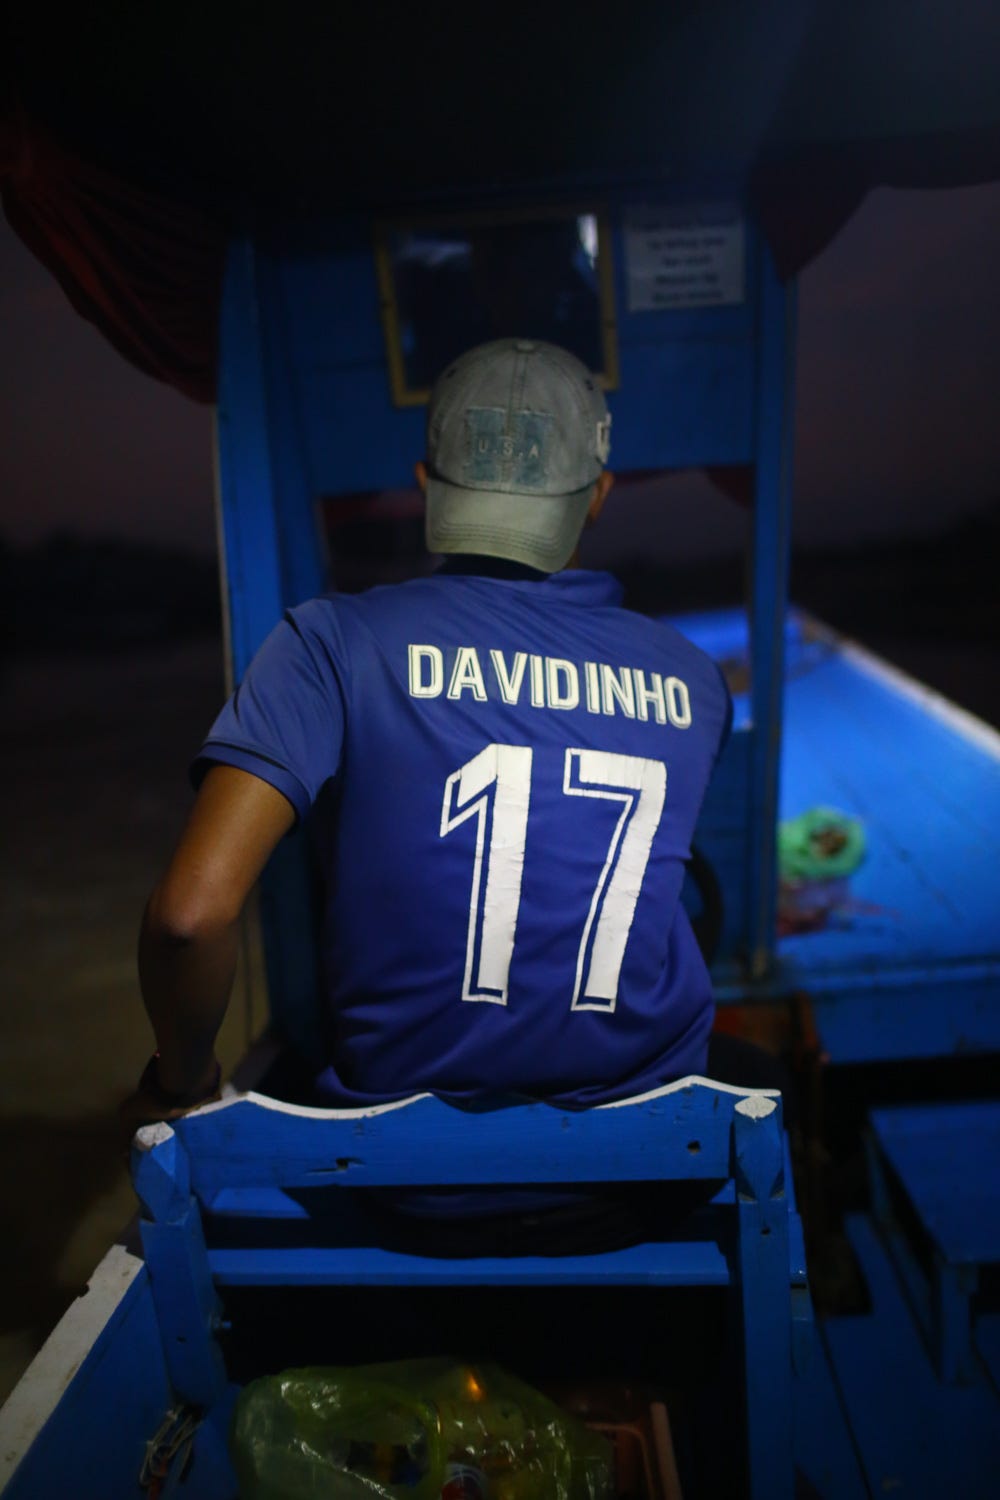 The boat driver, Davidinho, is shown from behind. His back is lit to show his soccer jersey, but the rest of the scene is dark. It is night. It is terrifying.